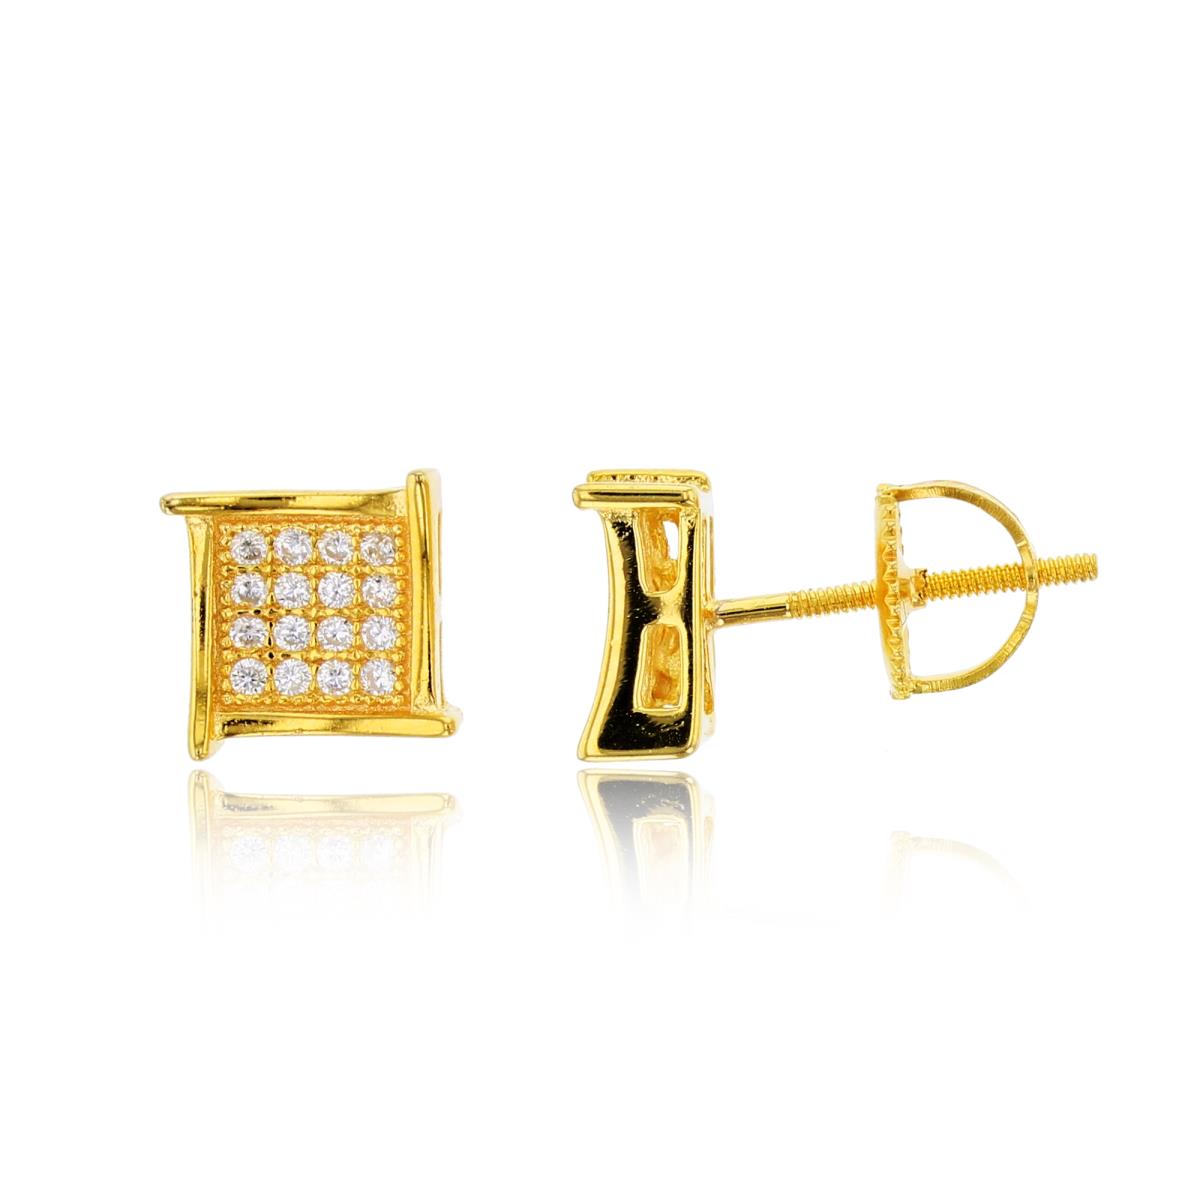 Sterling Silver Yellow 7.8x7.8m Fancy Square Micropave Screwback Stud Earring